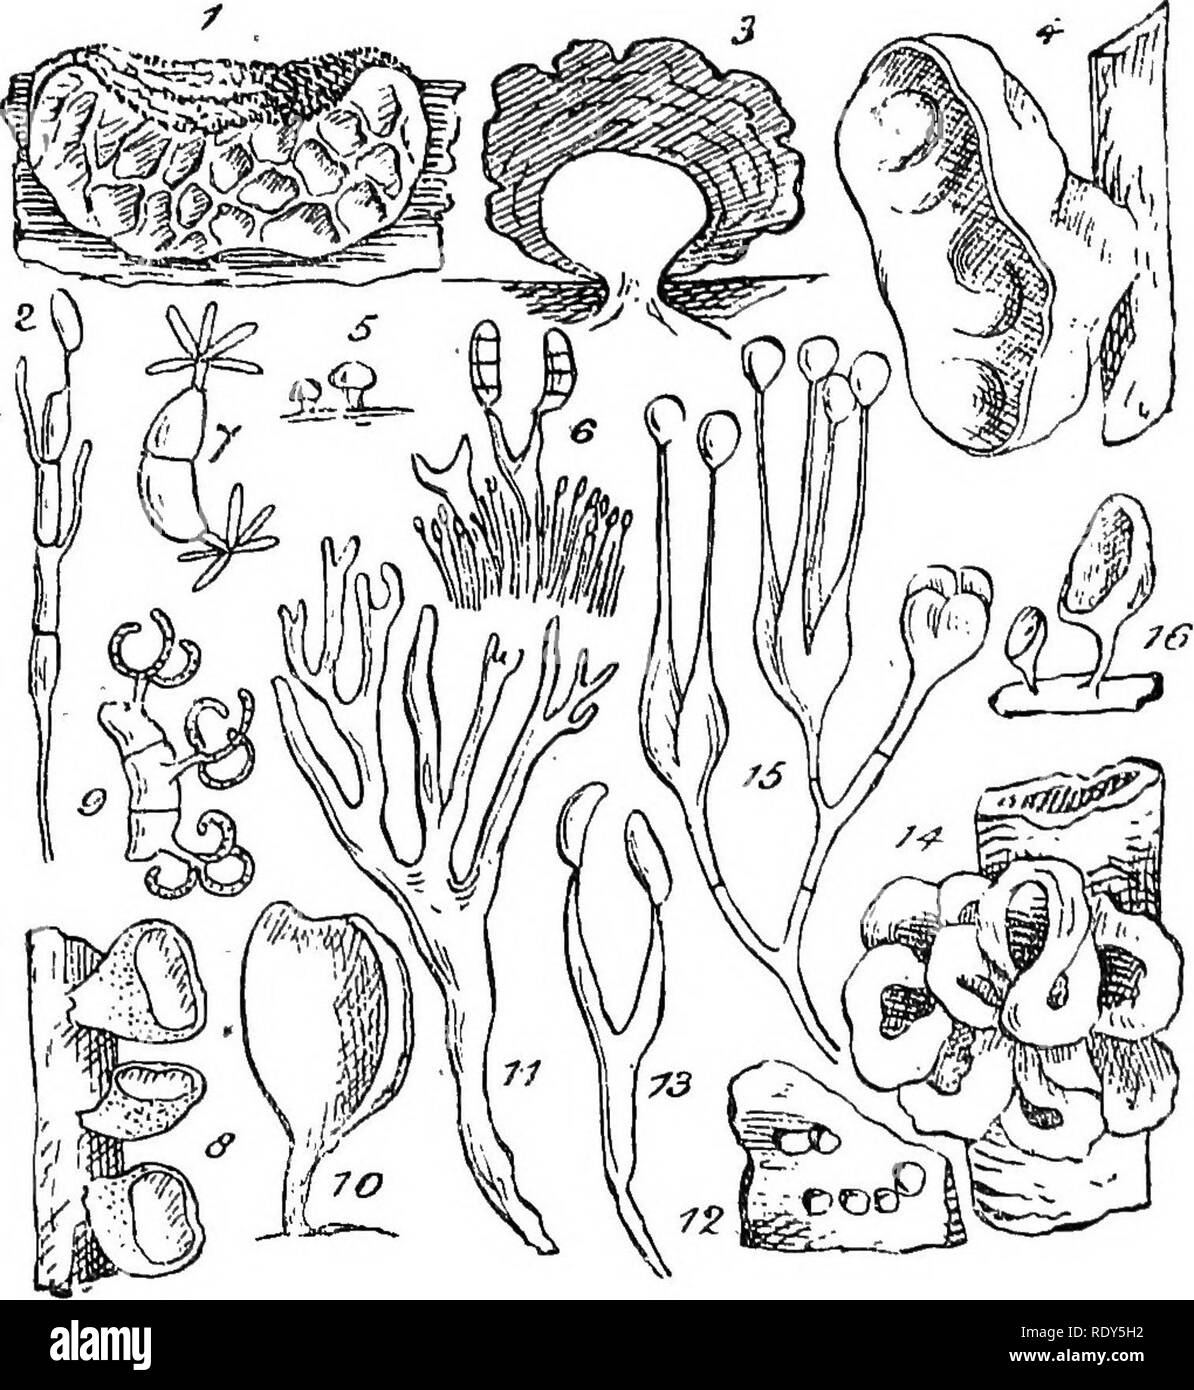 . British fungus-flora. A classified text-book of mycology. Fungi. 56 FUNGUS-FLOBA. 3. FIGUBES ILLUSTRATING THE TEEMELLINEAE. Fig. 1, Avrioularia mesenterica, a small speoimen; nat. size;—Fig. 2, basidium and spore of same ; highly mag.—^Fig, 3, Naematelia encepliala, section of, showing the central nucleus; nat. size;—Fig. 4, Hirneola auricula-mdae, small speoimen; nat. size ;—Fig. 5. Dacryopiie nuda; nat. size,;—^Fig. 6, portion of head of same, showing the densely fasciculate couidiopbores with conidia, also basidia bearing three septata basidia spores; highly mag.;—Fig. 7, UloeoUa saochari Stock Photo